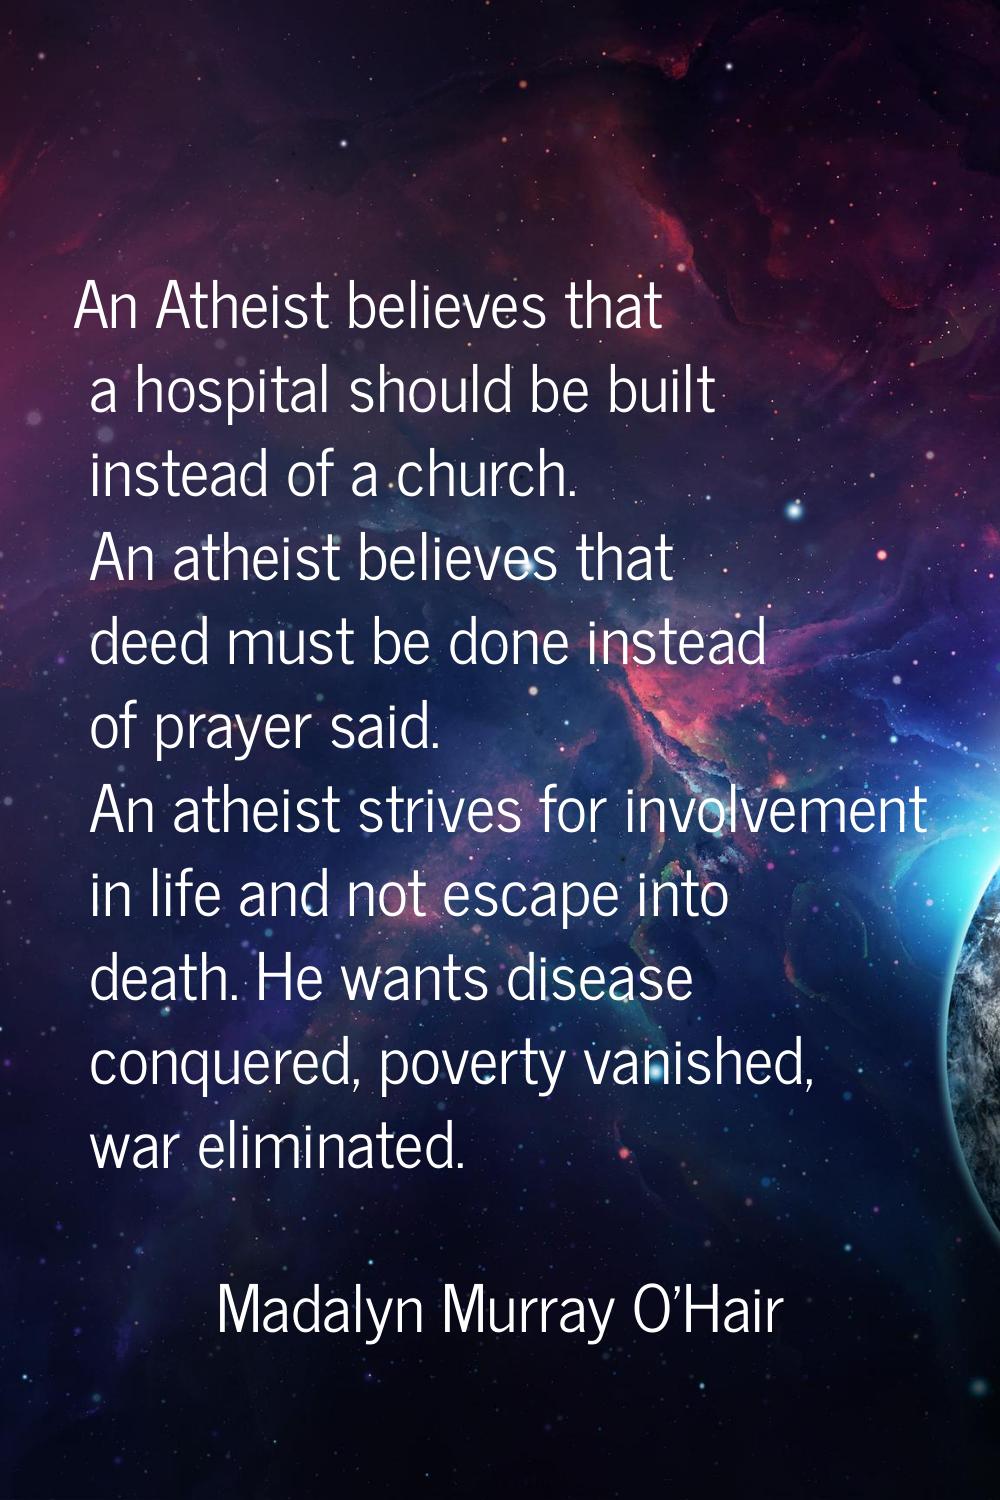 An Atheist believes that a hospital should be built instead of a church. An atheist believes that d